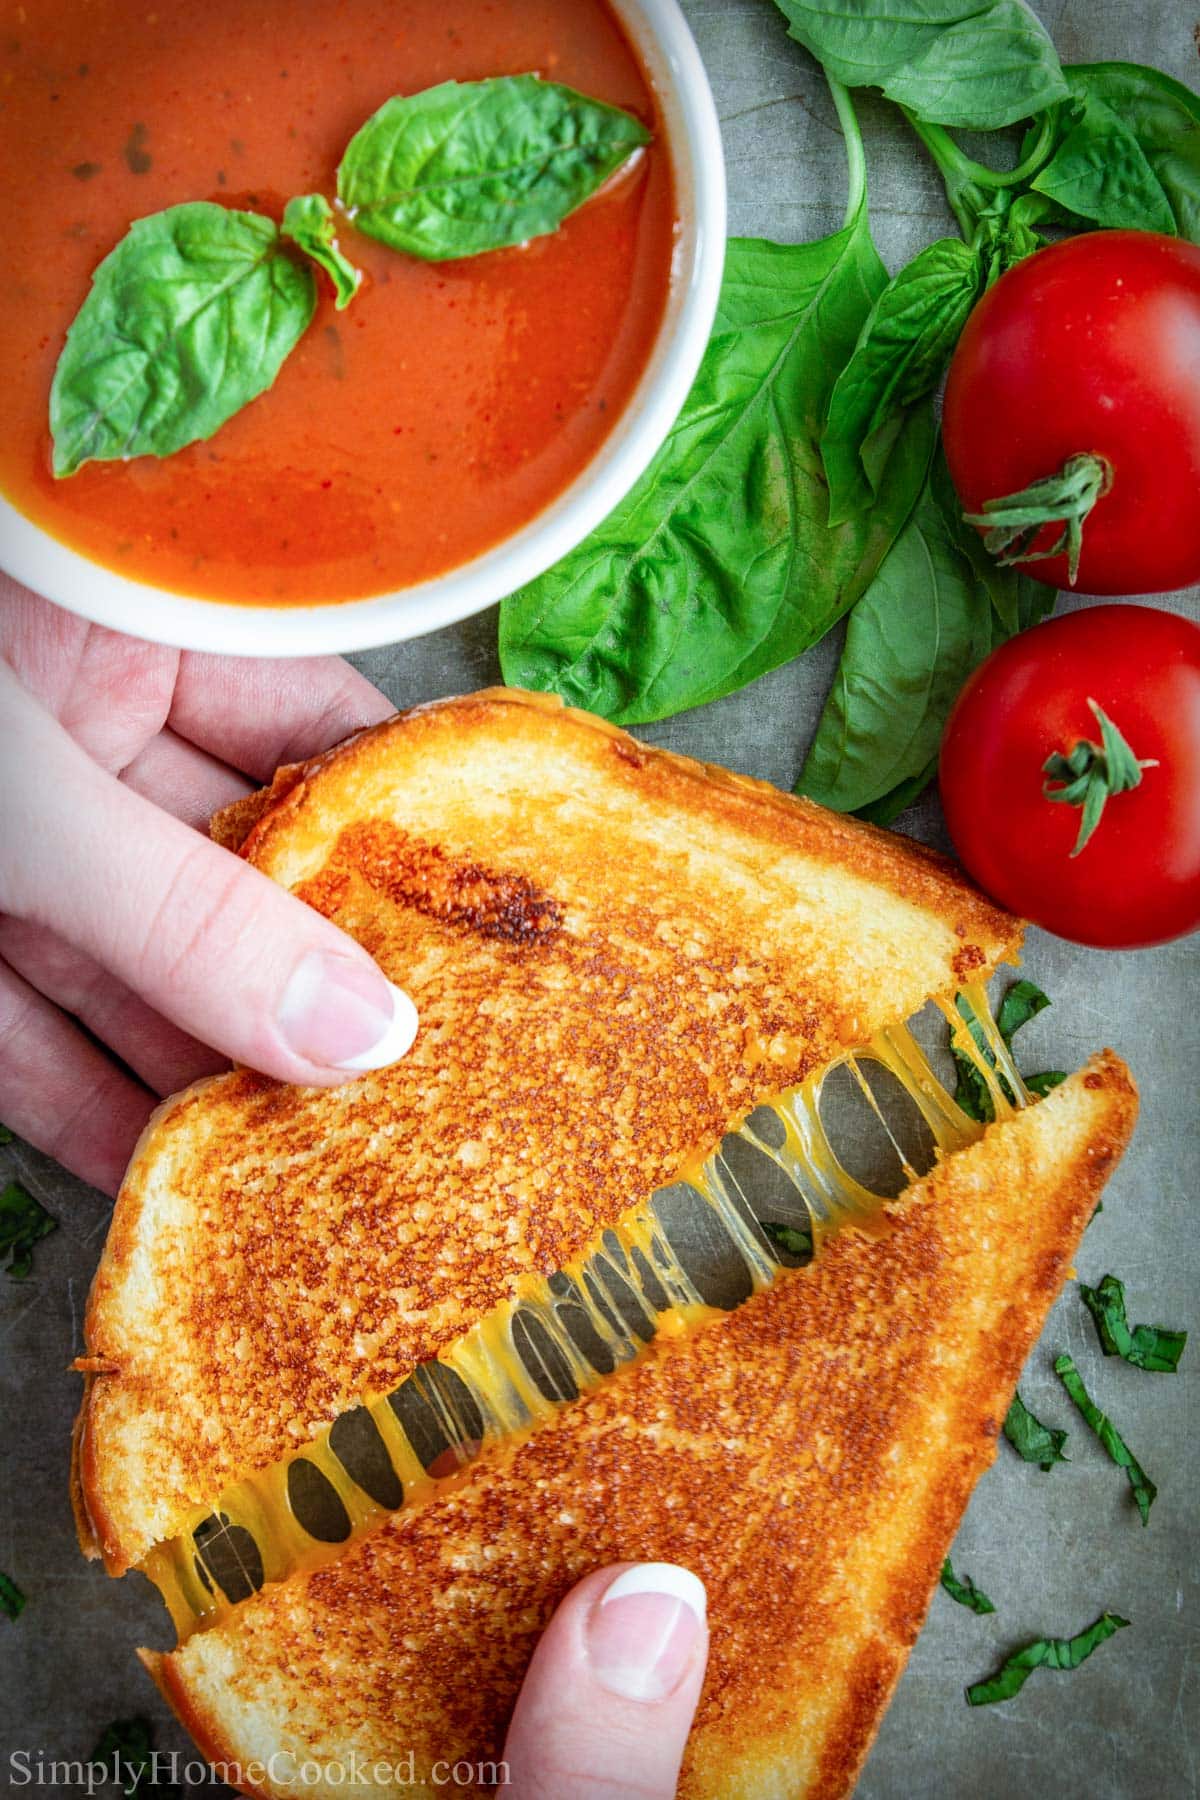 Vertical image of a Grilled Cheese Sandwich being pulled apart, with tomatoes and tomato soup in the background